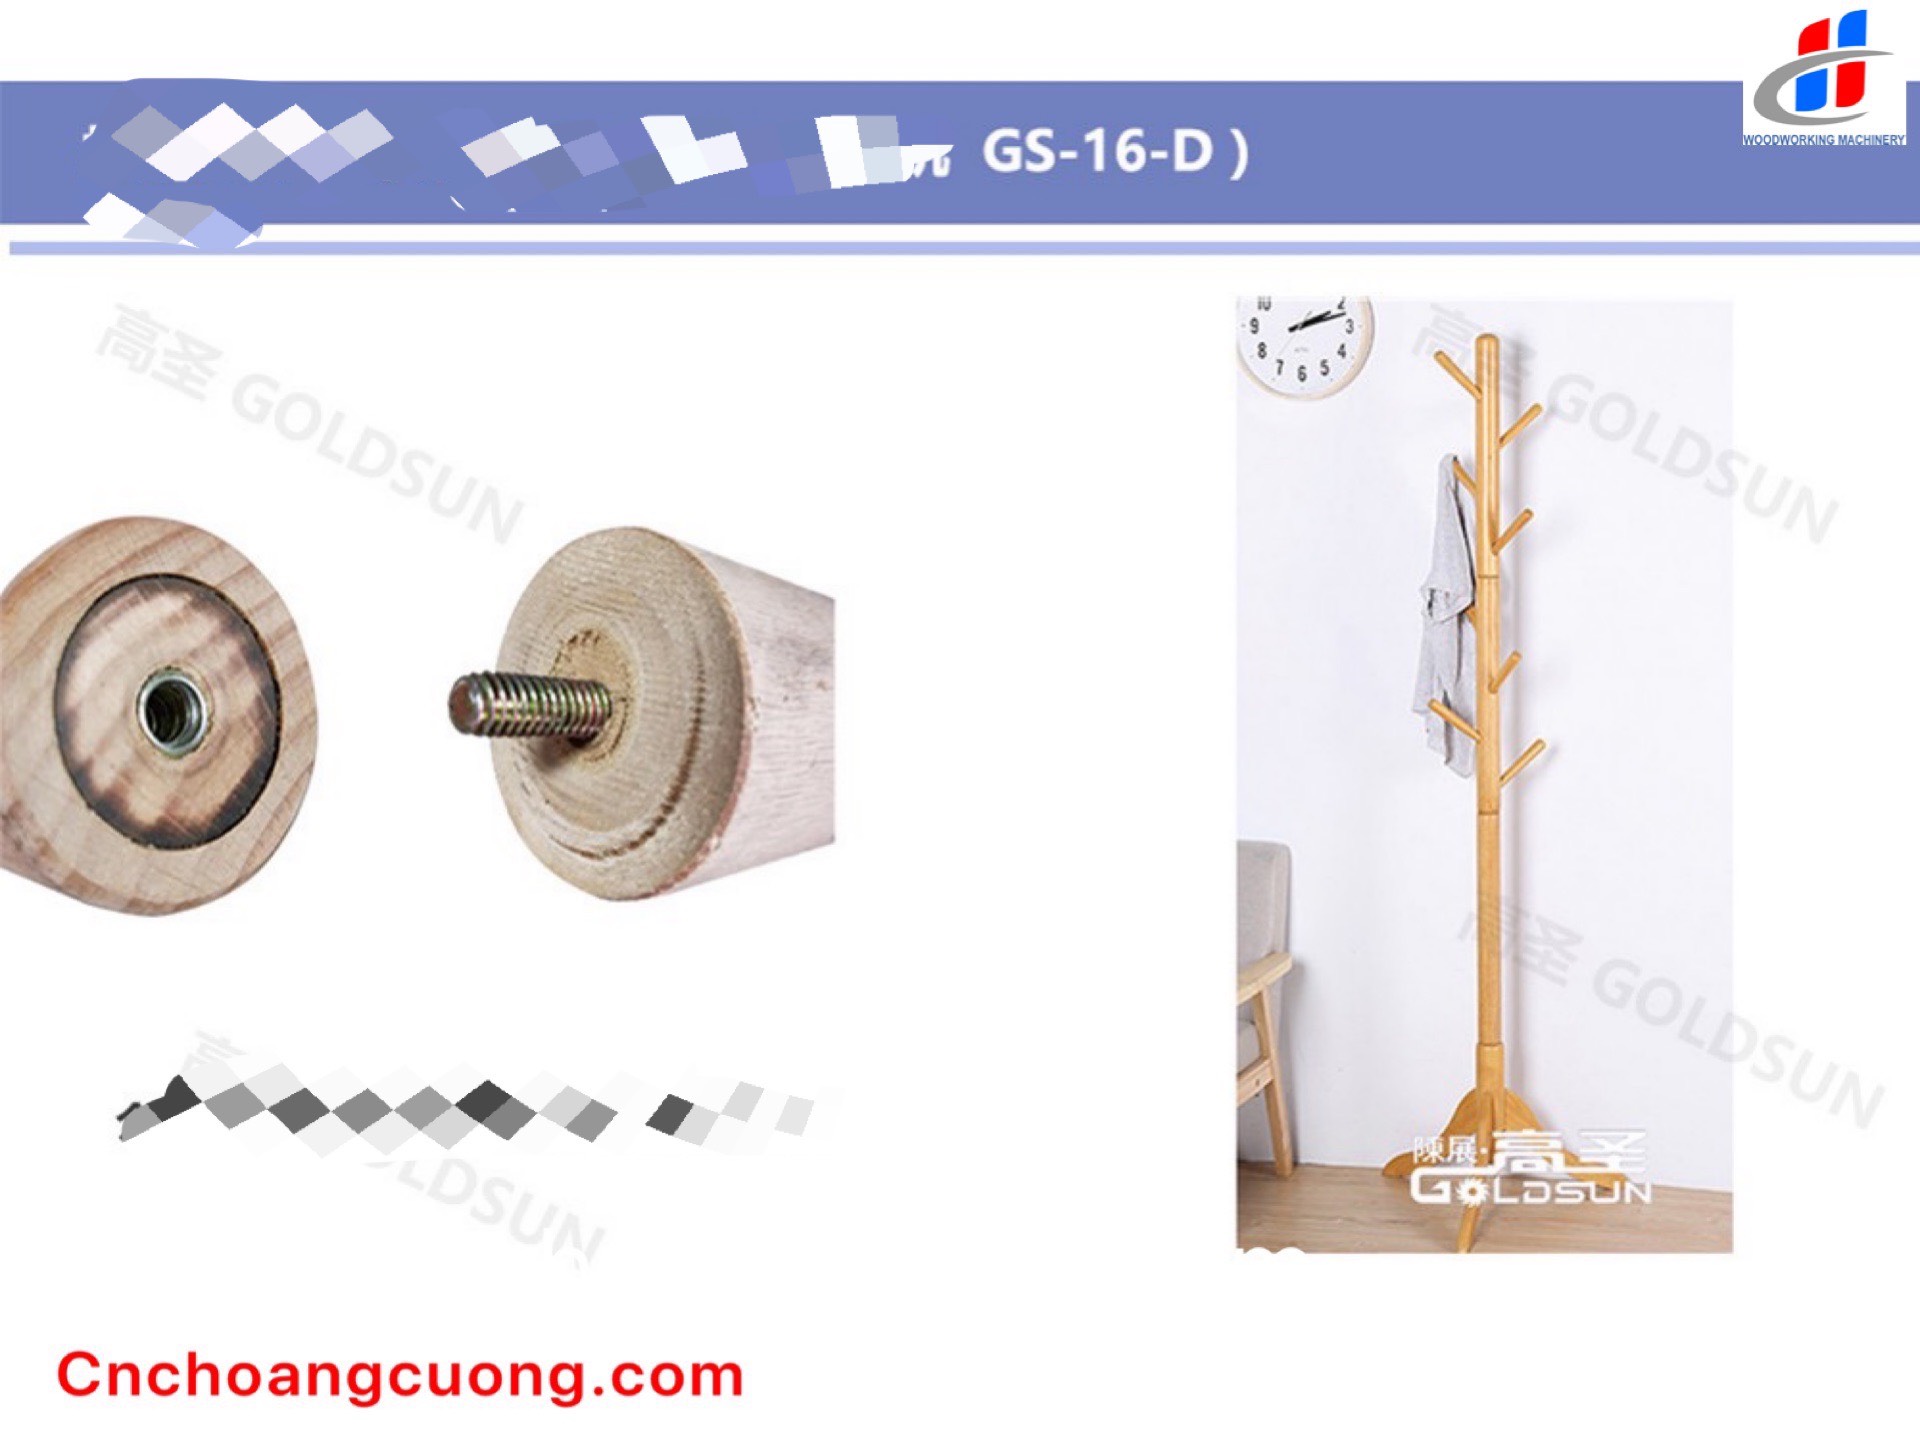 https://cnchoangcuong.com/?post_type=product&p=3825&preview=true